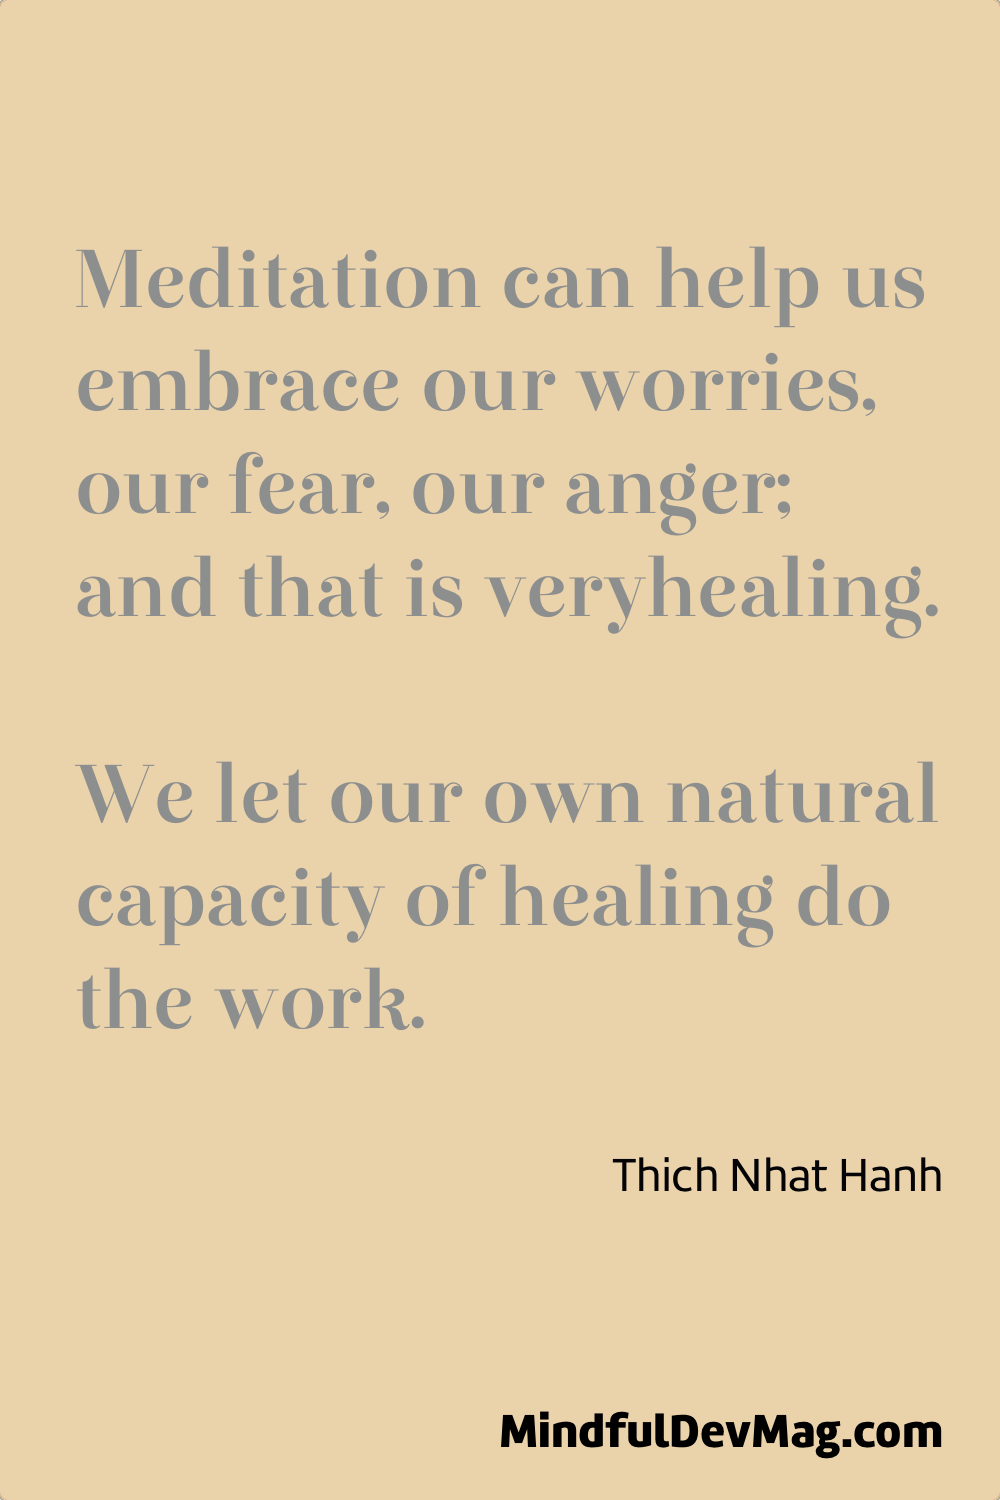 Mindful quote: Meditation can help us embrace our worries, our fear, our anger; and that is very healing. We let our own natural capacity of healing do the work.  - Thich Nhat Hanh